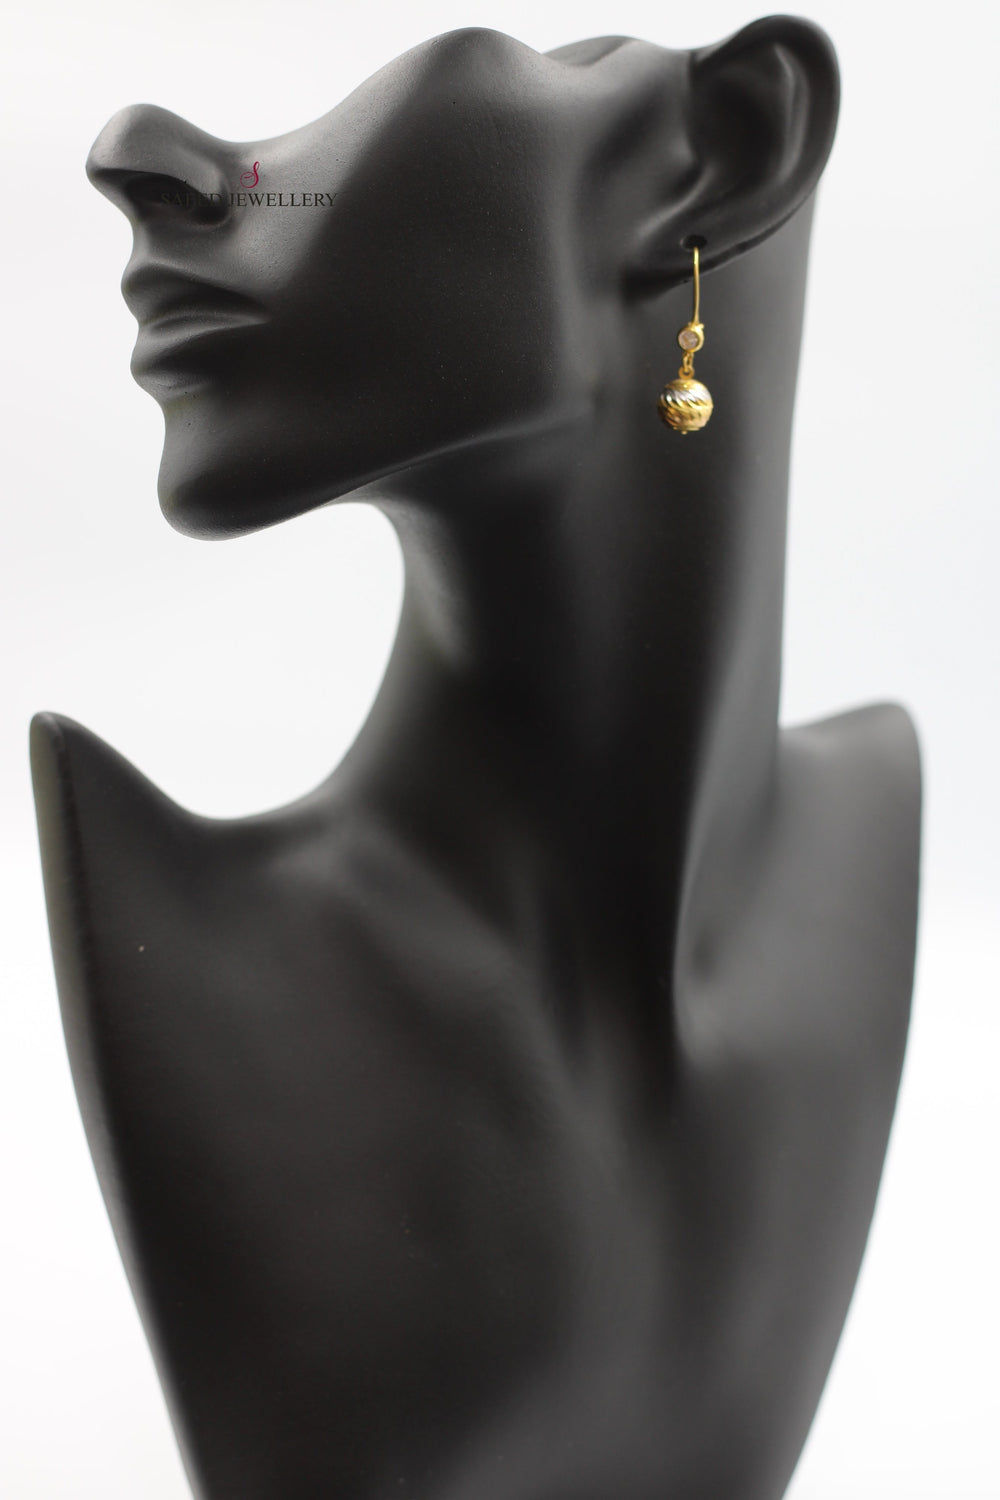 21K Gold Balls Earrings by Saeed Jewelry - Image 2